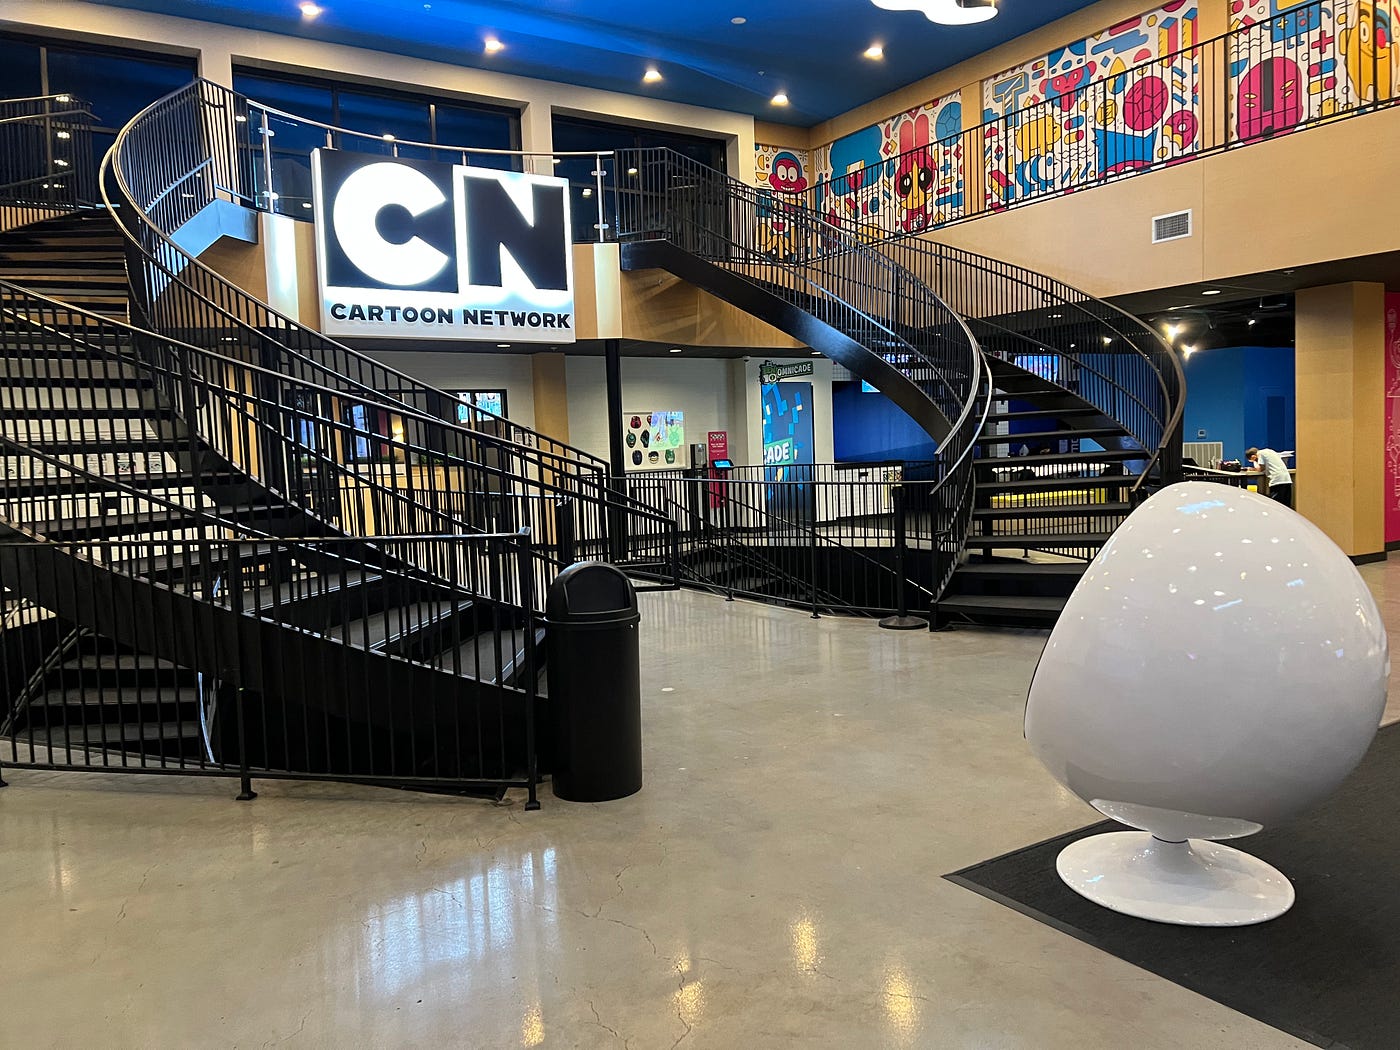 The Cartoon Network Hotel: A Must for Families!, by Zibby Owens, Moms  Don't Have Time to Write